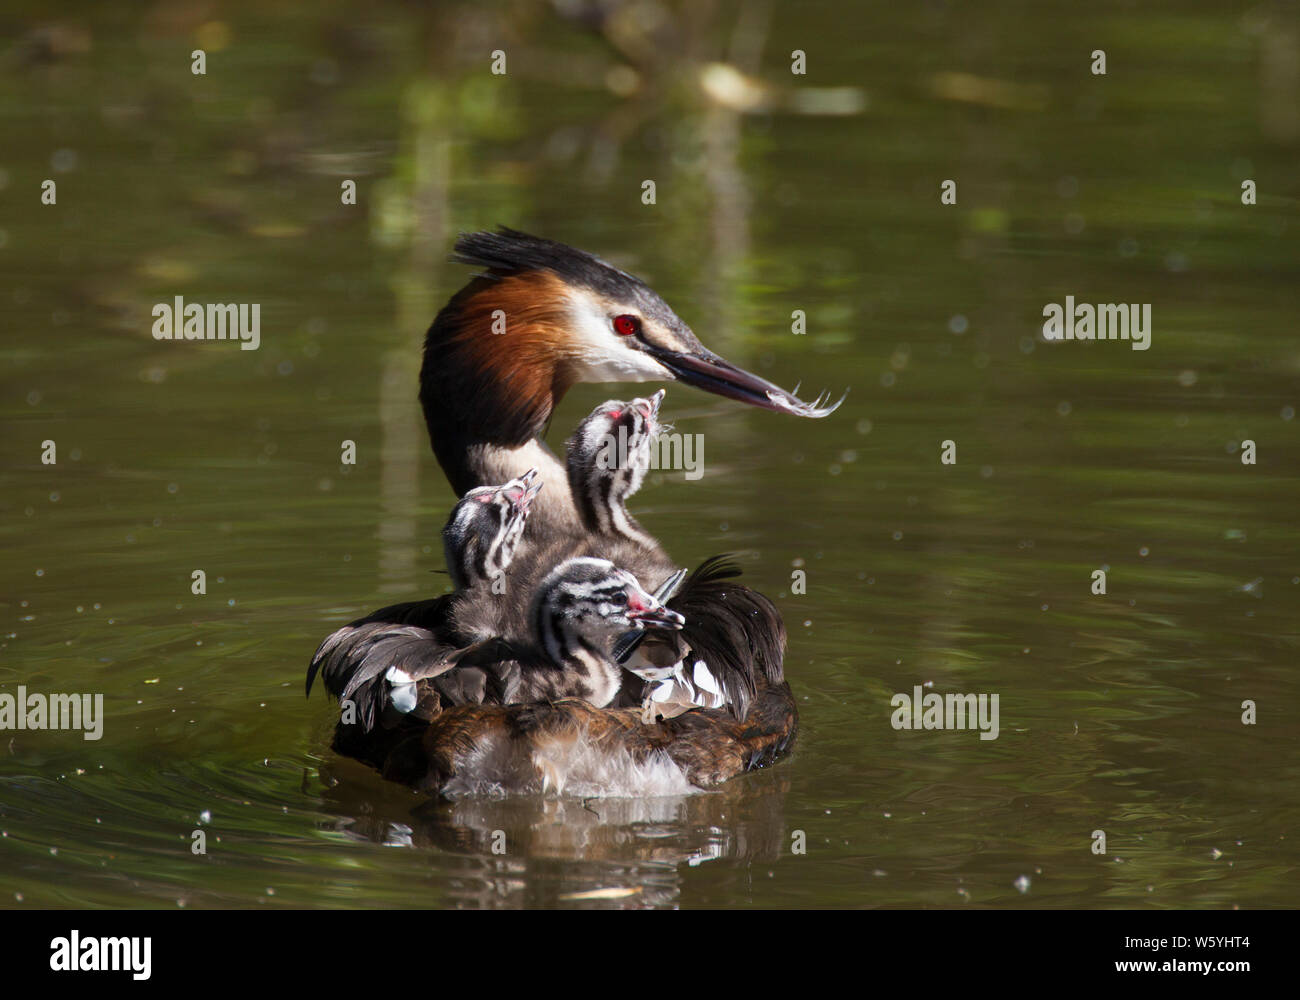 Great-crested Grebe, Podiceps cristatus, single adult carrying young on back and holding feather in its bill. Lea Valley, Essex, UK. Stock Photo